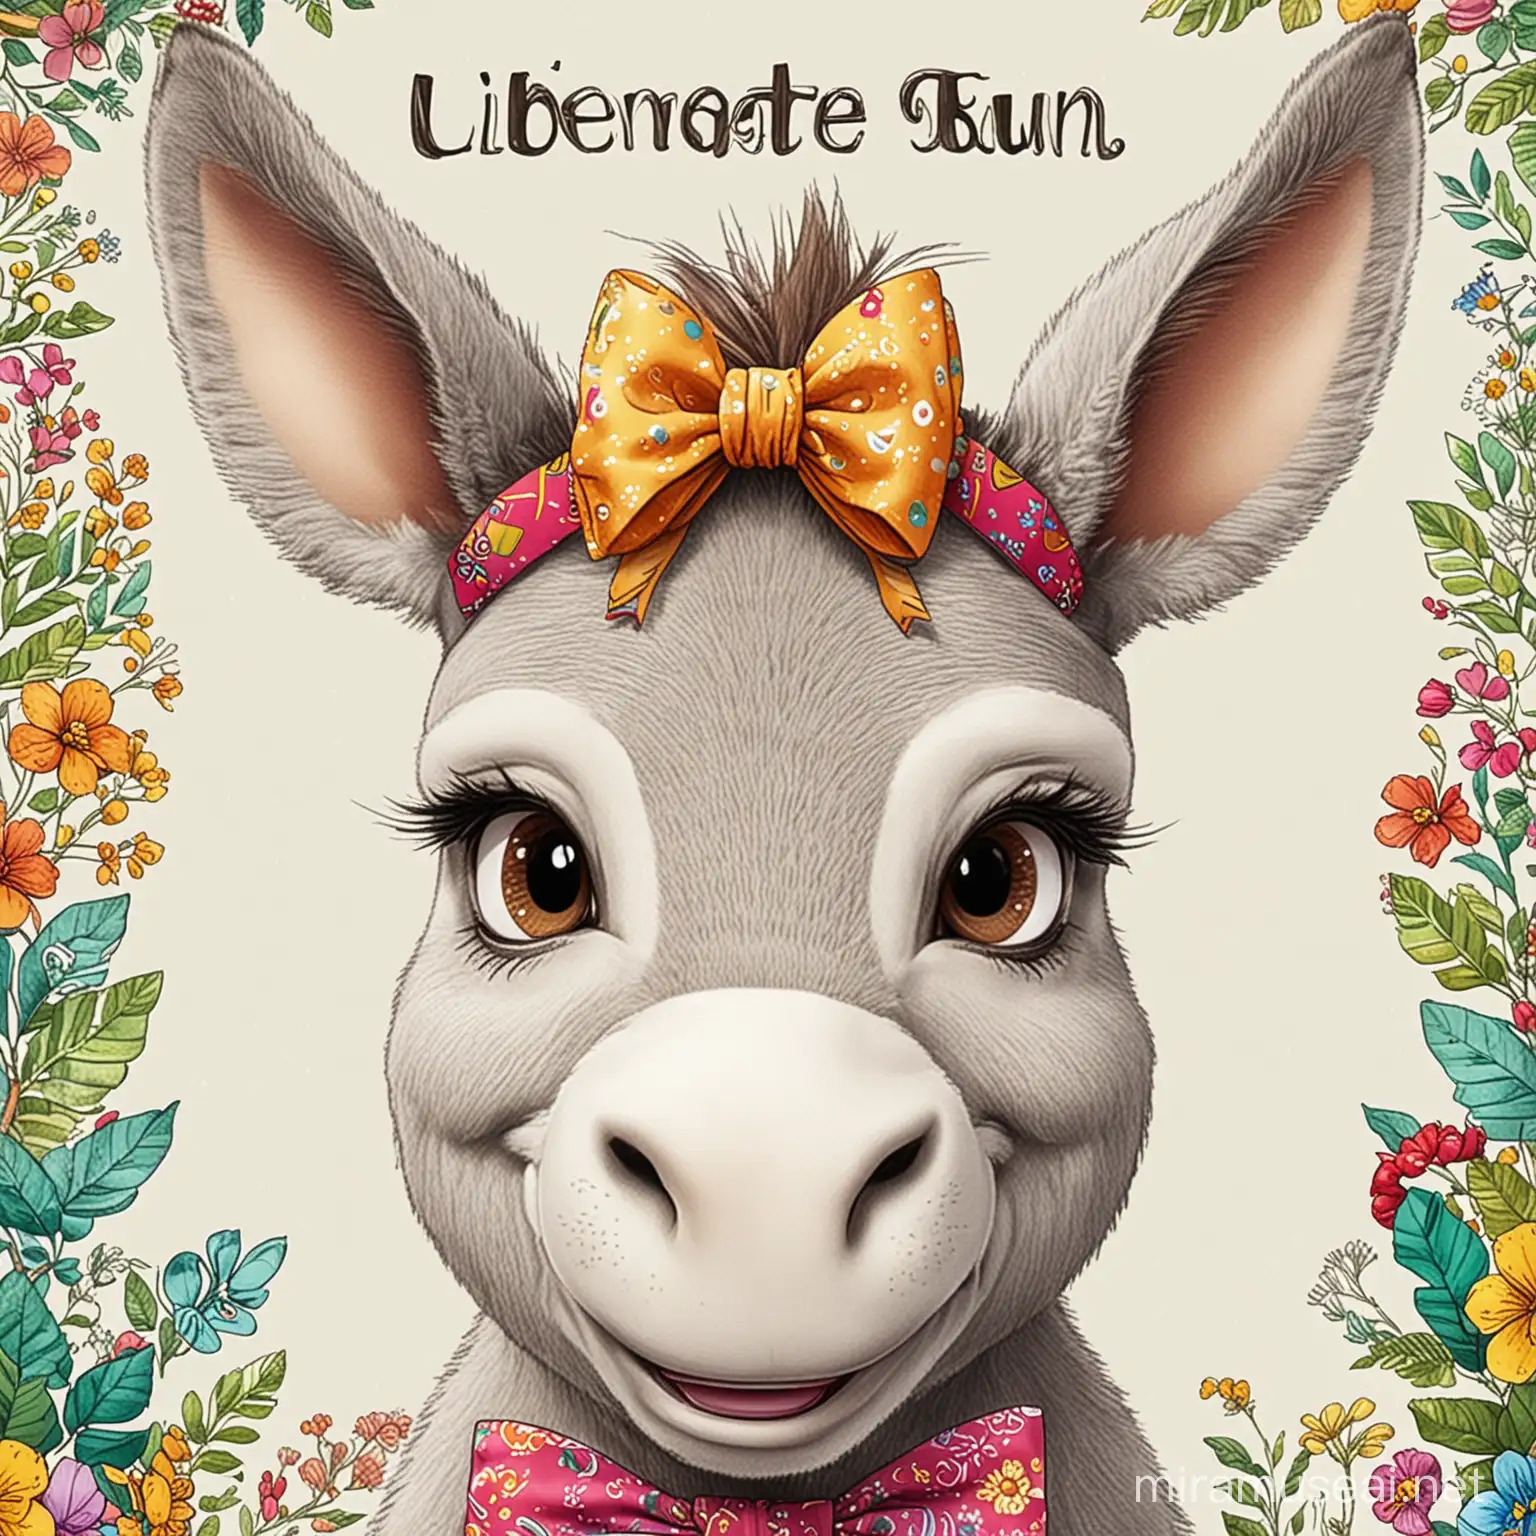 Generate ulustrate fun coloring book cover for 3 years old Smile donkey with bow full color